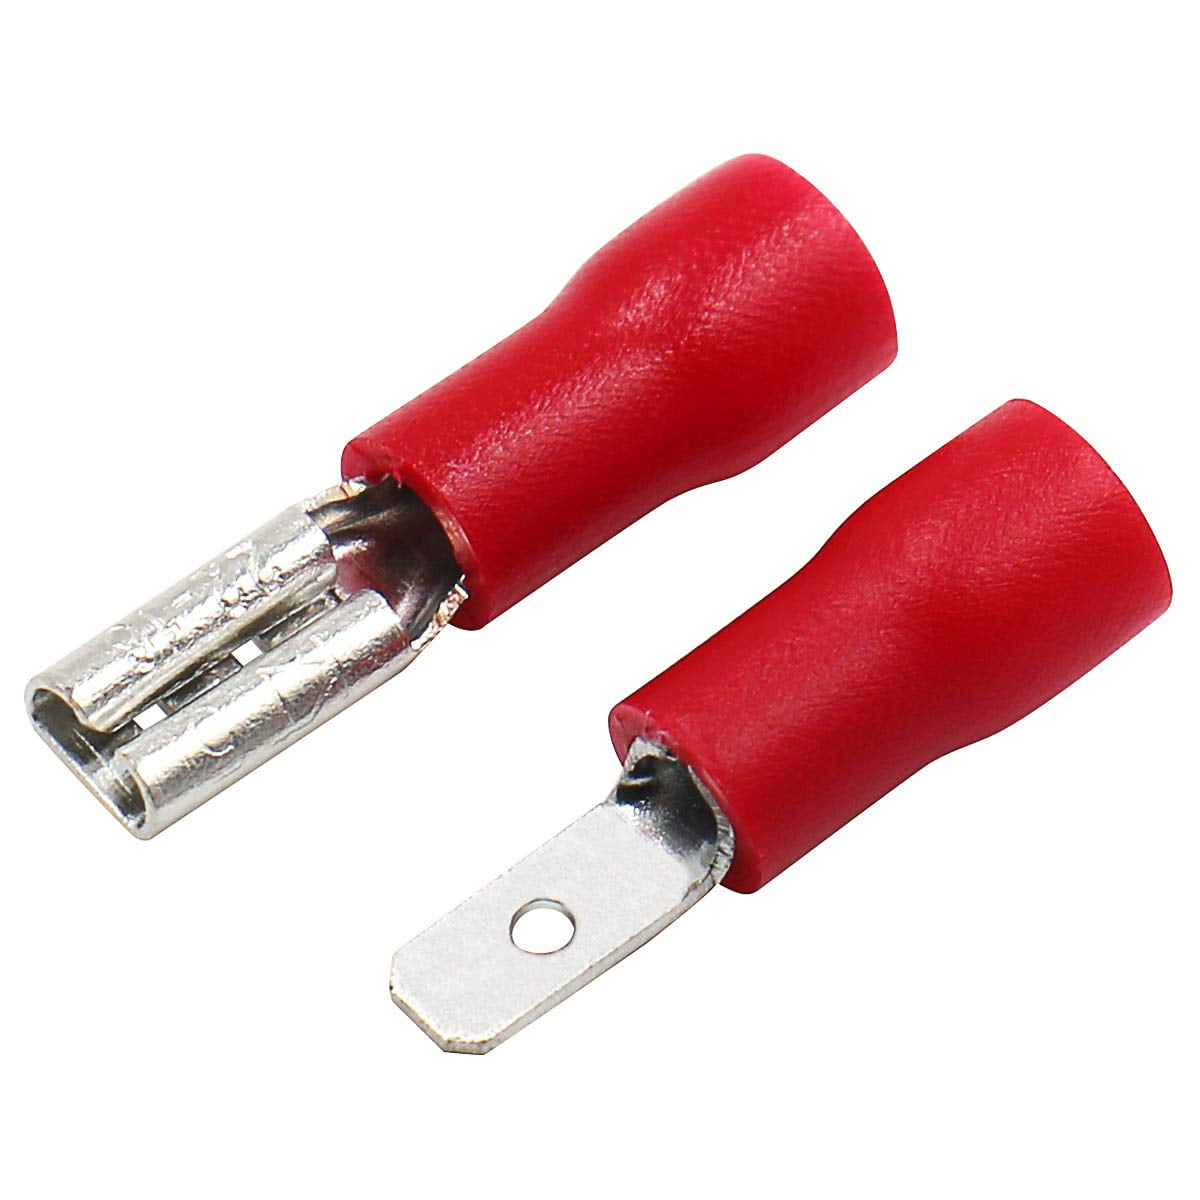 50 x PAIRS Red 2.8mm Male Female Insulated Crimp Spade Connector 